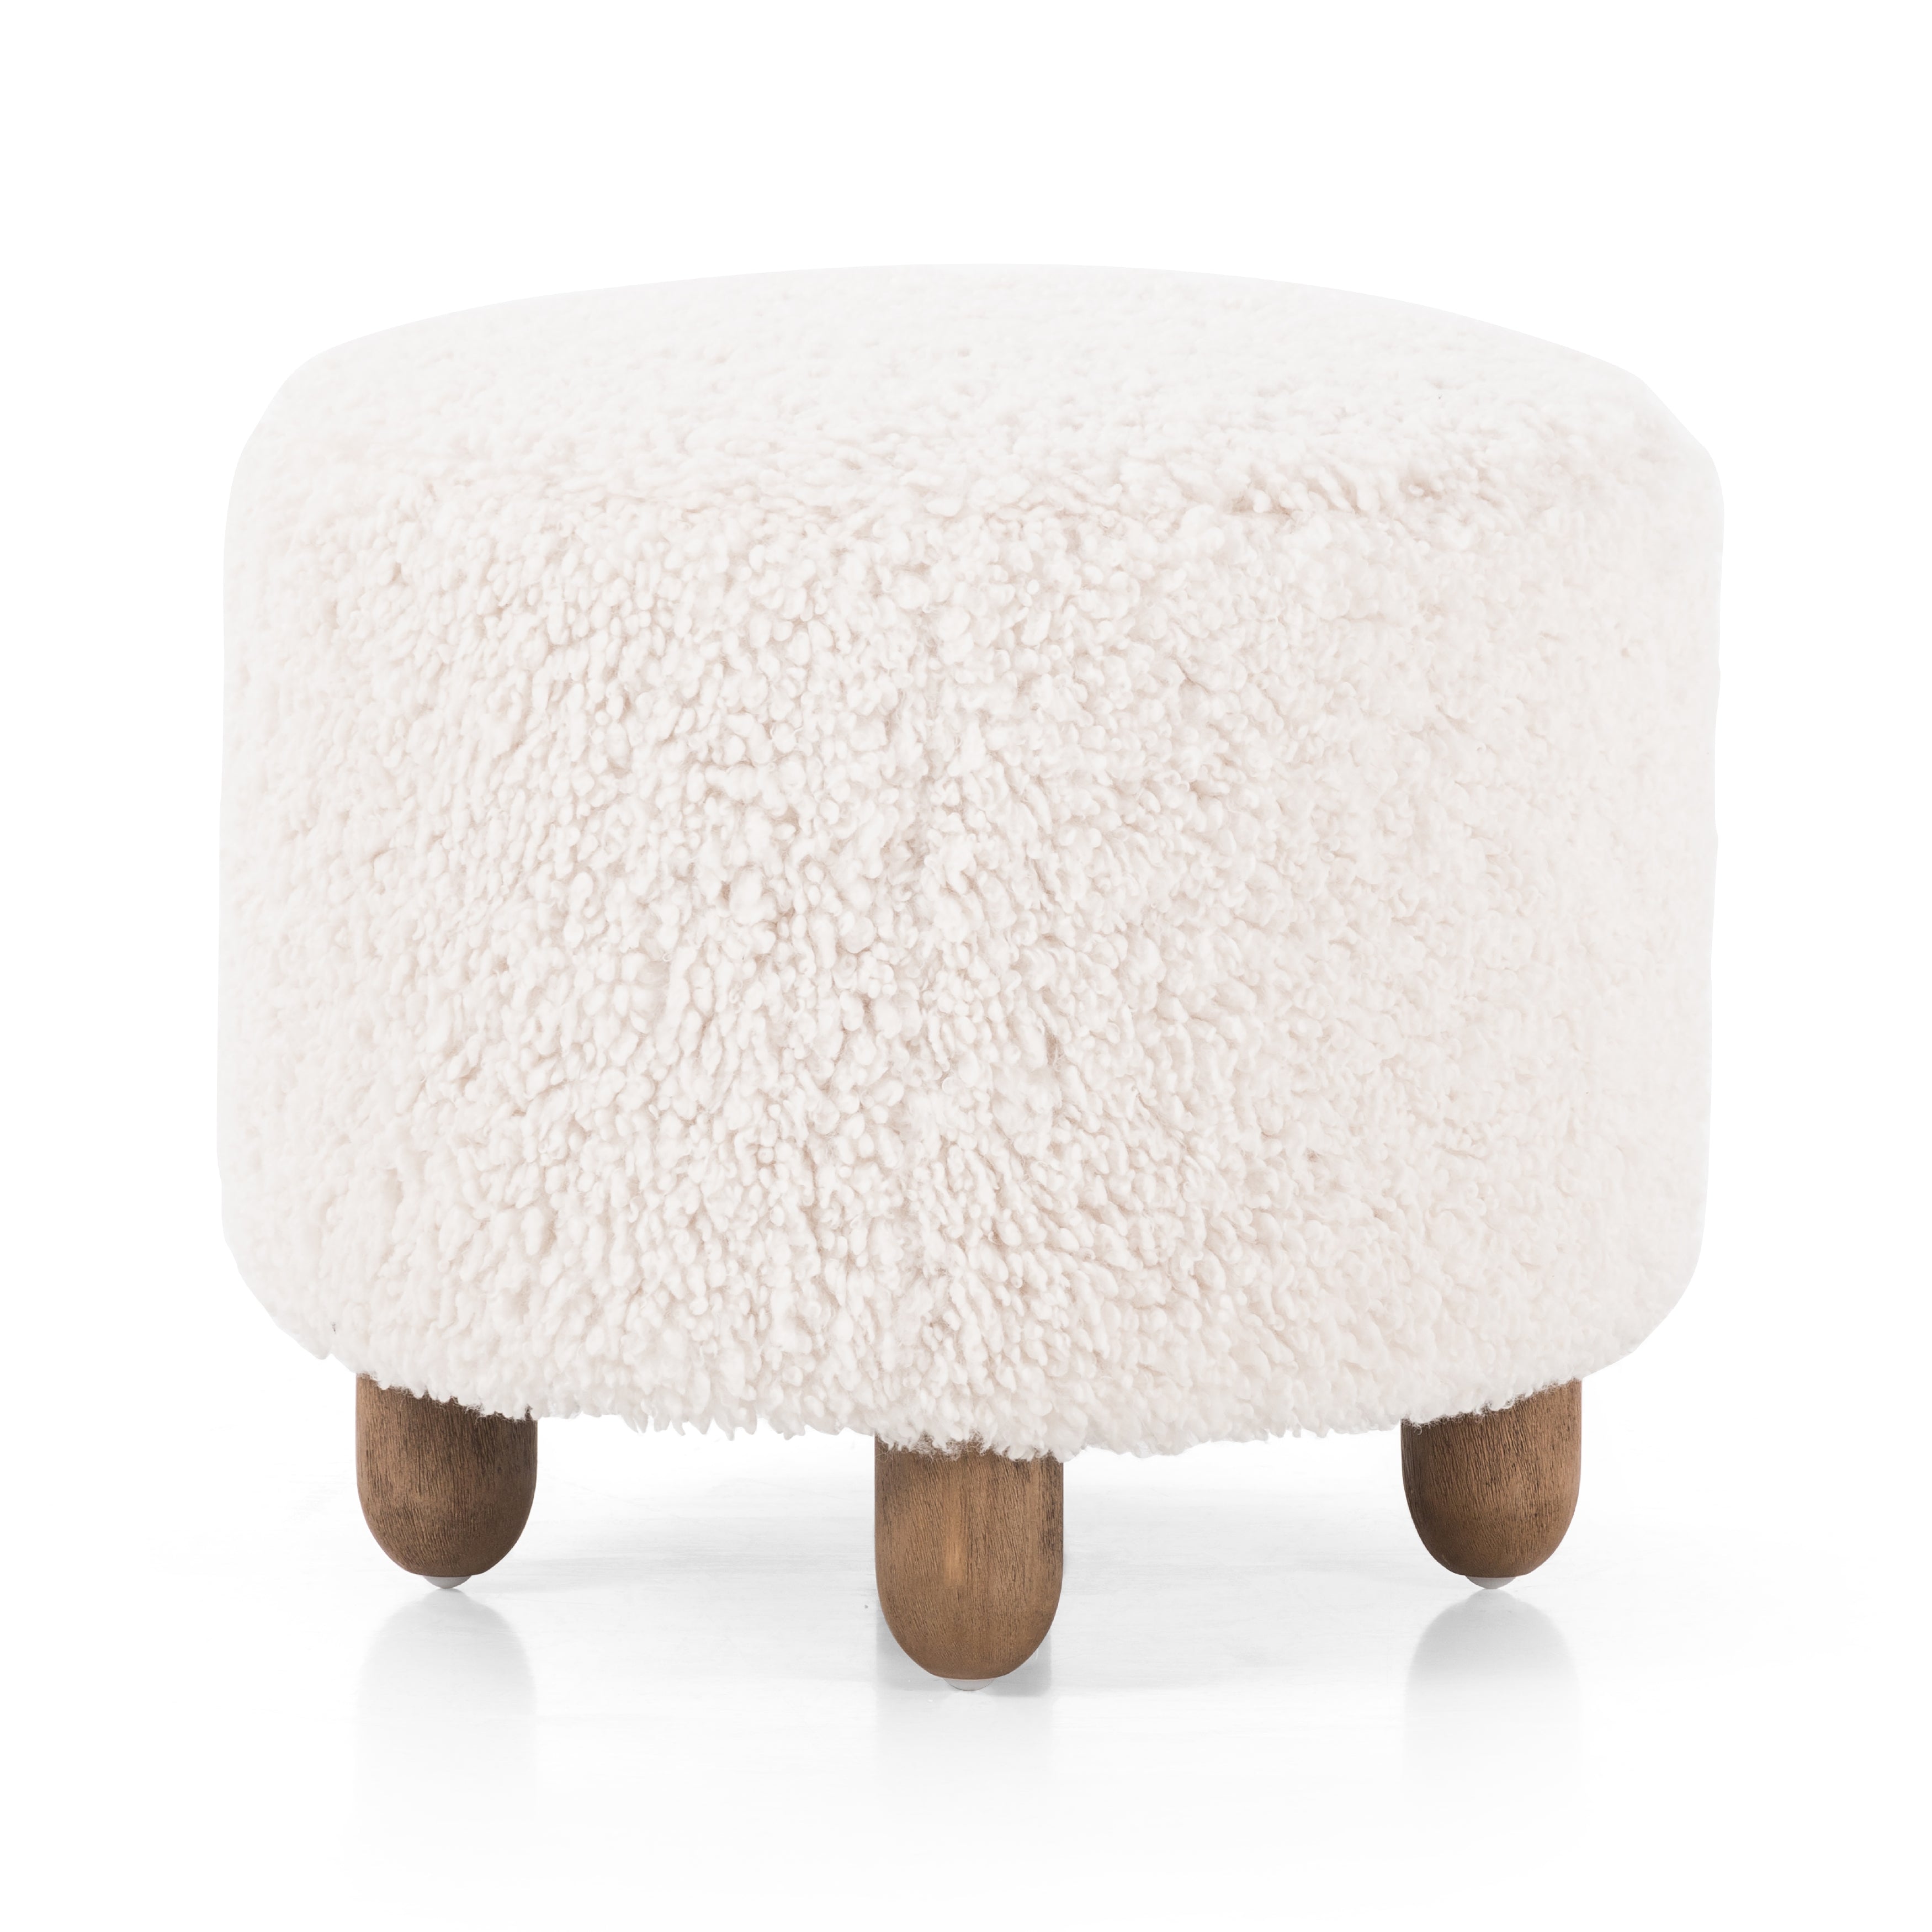 Place this round Aniston Andes Natural Ottoman just about anywhere for a subtle retro vibe. Upholstered in a faux Mongolian shearling with a high pile fur. Parawood legs are wirebrushed for a warm, vintage feel. Amethyst Home provides interior design services, furniture, rugs, and lighting in the Miami metro area.